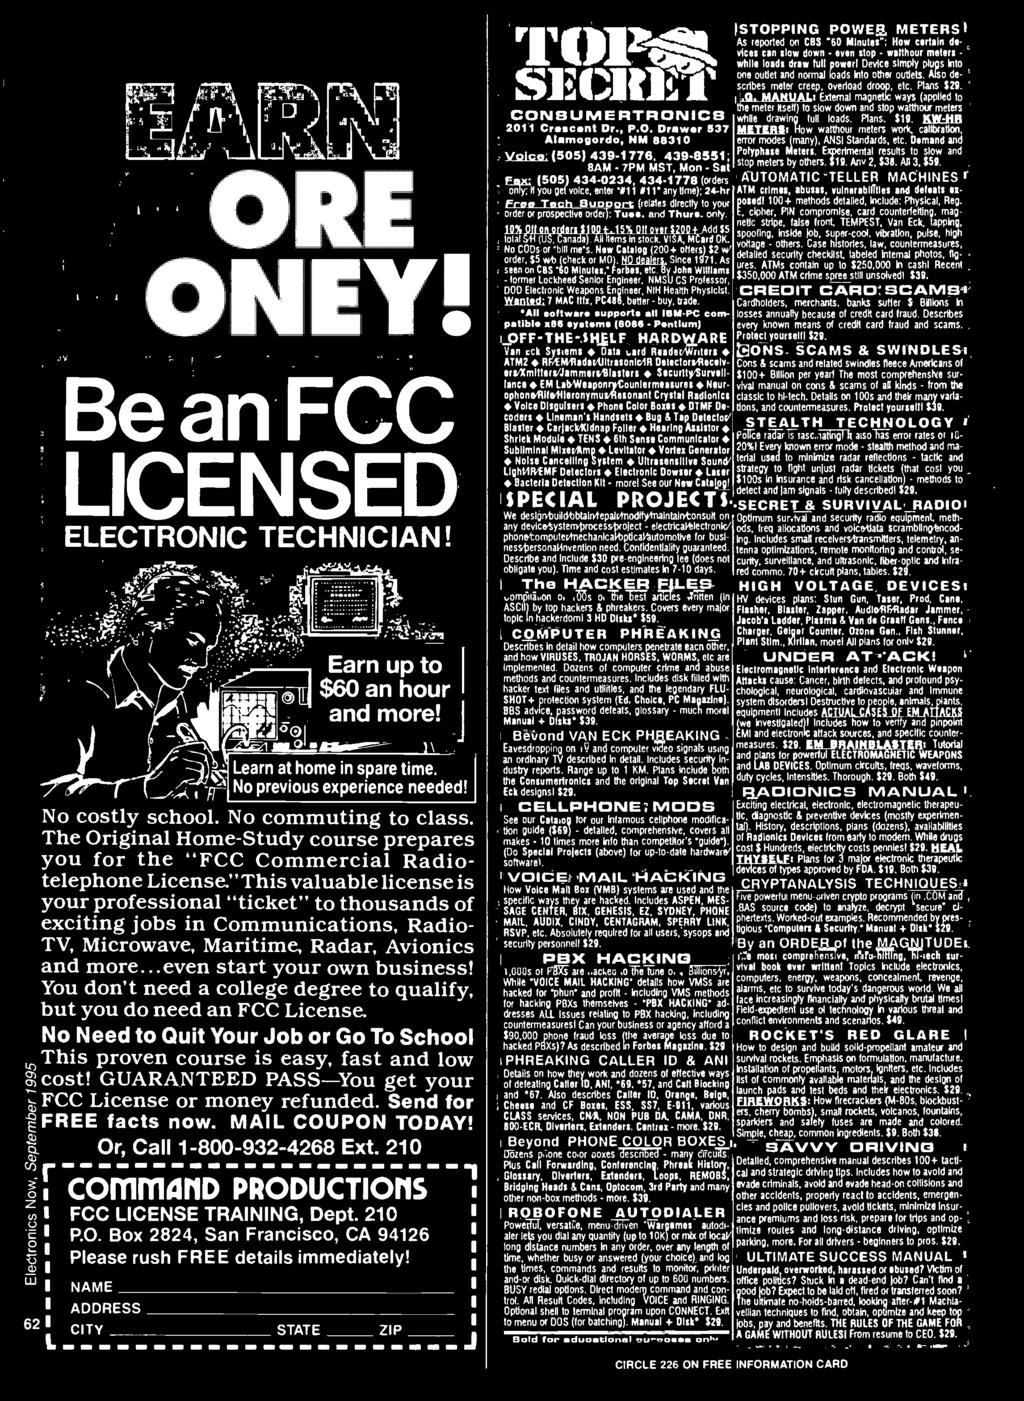 GUARANTEED PASS You get your FCC License or money refunded. Send for t FREE facts now. MAIL COUPON TODAY! Or, Call 1-800 - 932-4268 Ext. 210 0, command PRODUCTIOMS I FCC LICENSE TRAINING, Dept.